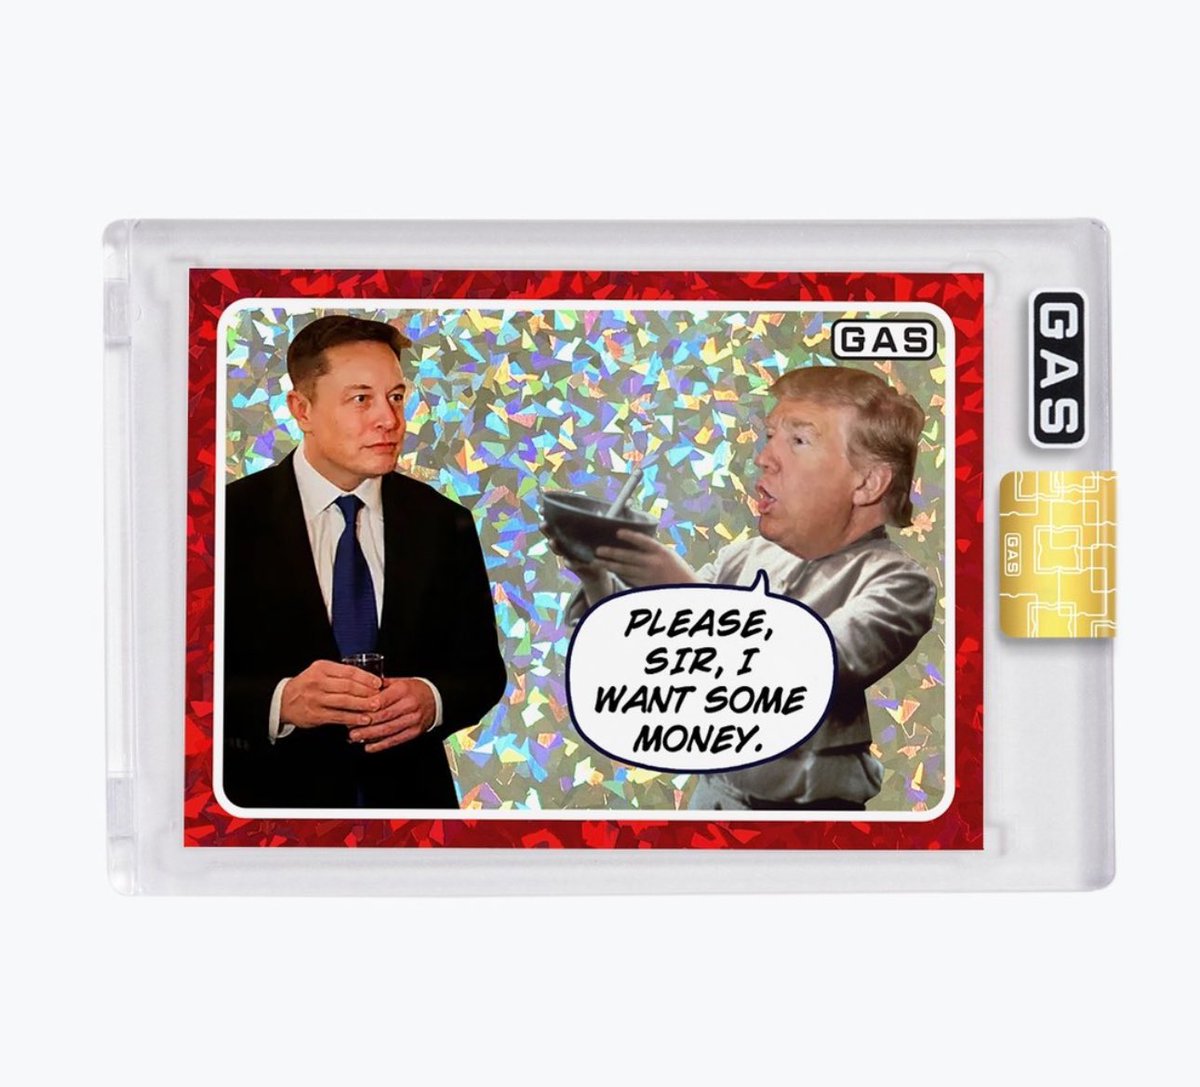 Shock Drop! Ltd edGAS Donald Trump Meets with Elon Musk Cracked Foil Prism Cards Available for Preorder on GASTradingCards.com and @ntwrk TheNTWRK.com Now! Ltd to 100 #’ed Cracked Foil Prism Trading Cards, available first come, first served. #tradingcards